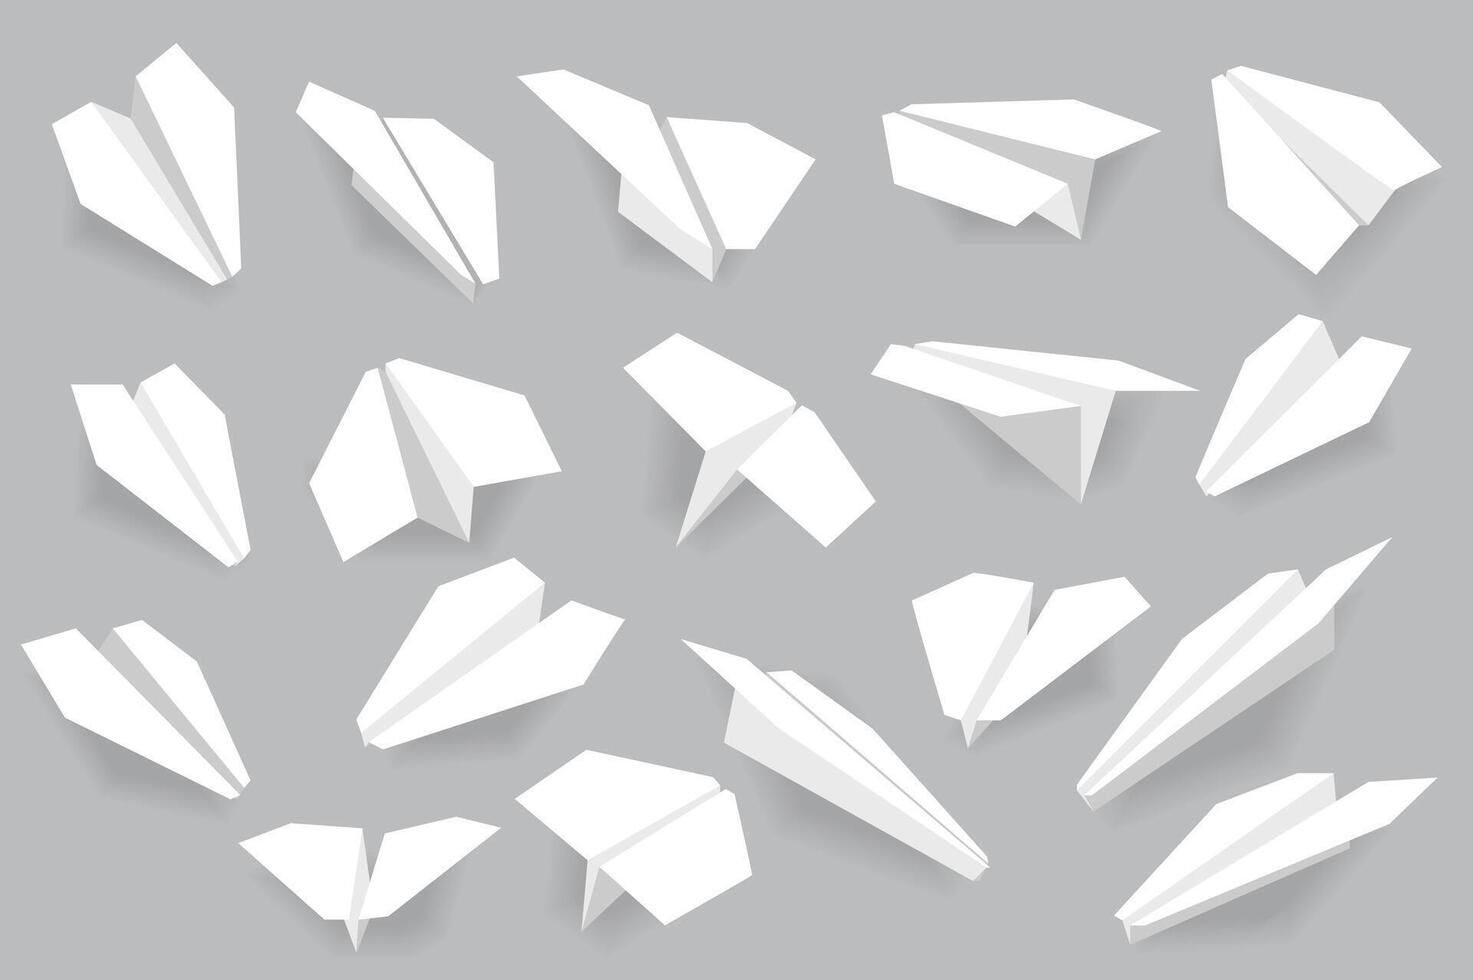 Realistic paper planes mega set in flat design. Bundle elements of different views of white handmade origami aircrafts for business idea or message sings. Vector illustration isolated graphic objects